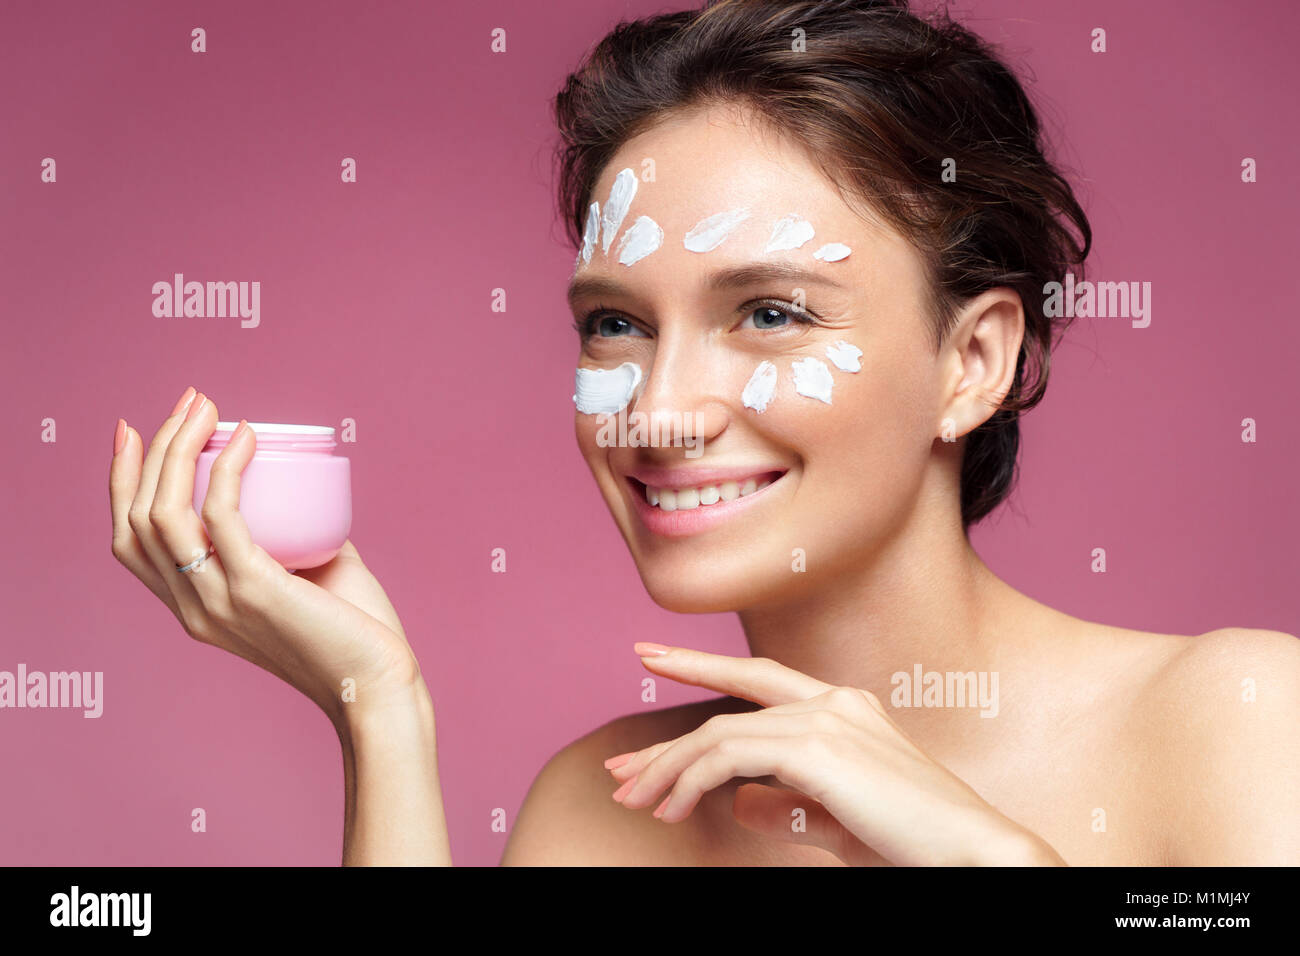 Woman applying wrinkle cream or anti-aging skin care cream. Photo of smiling woman with healthy skin on pink background. Skin care concept Stock Photo